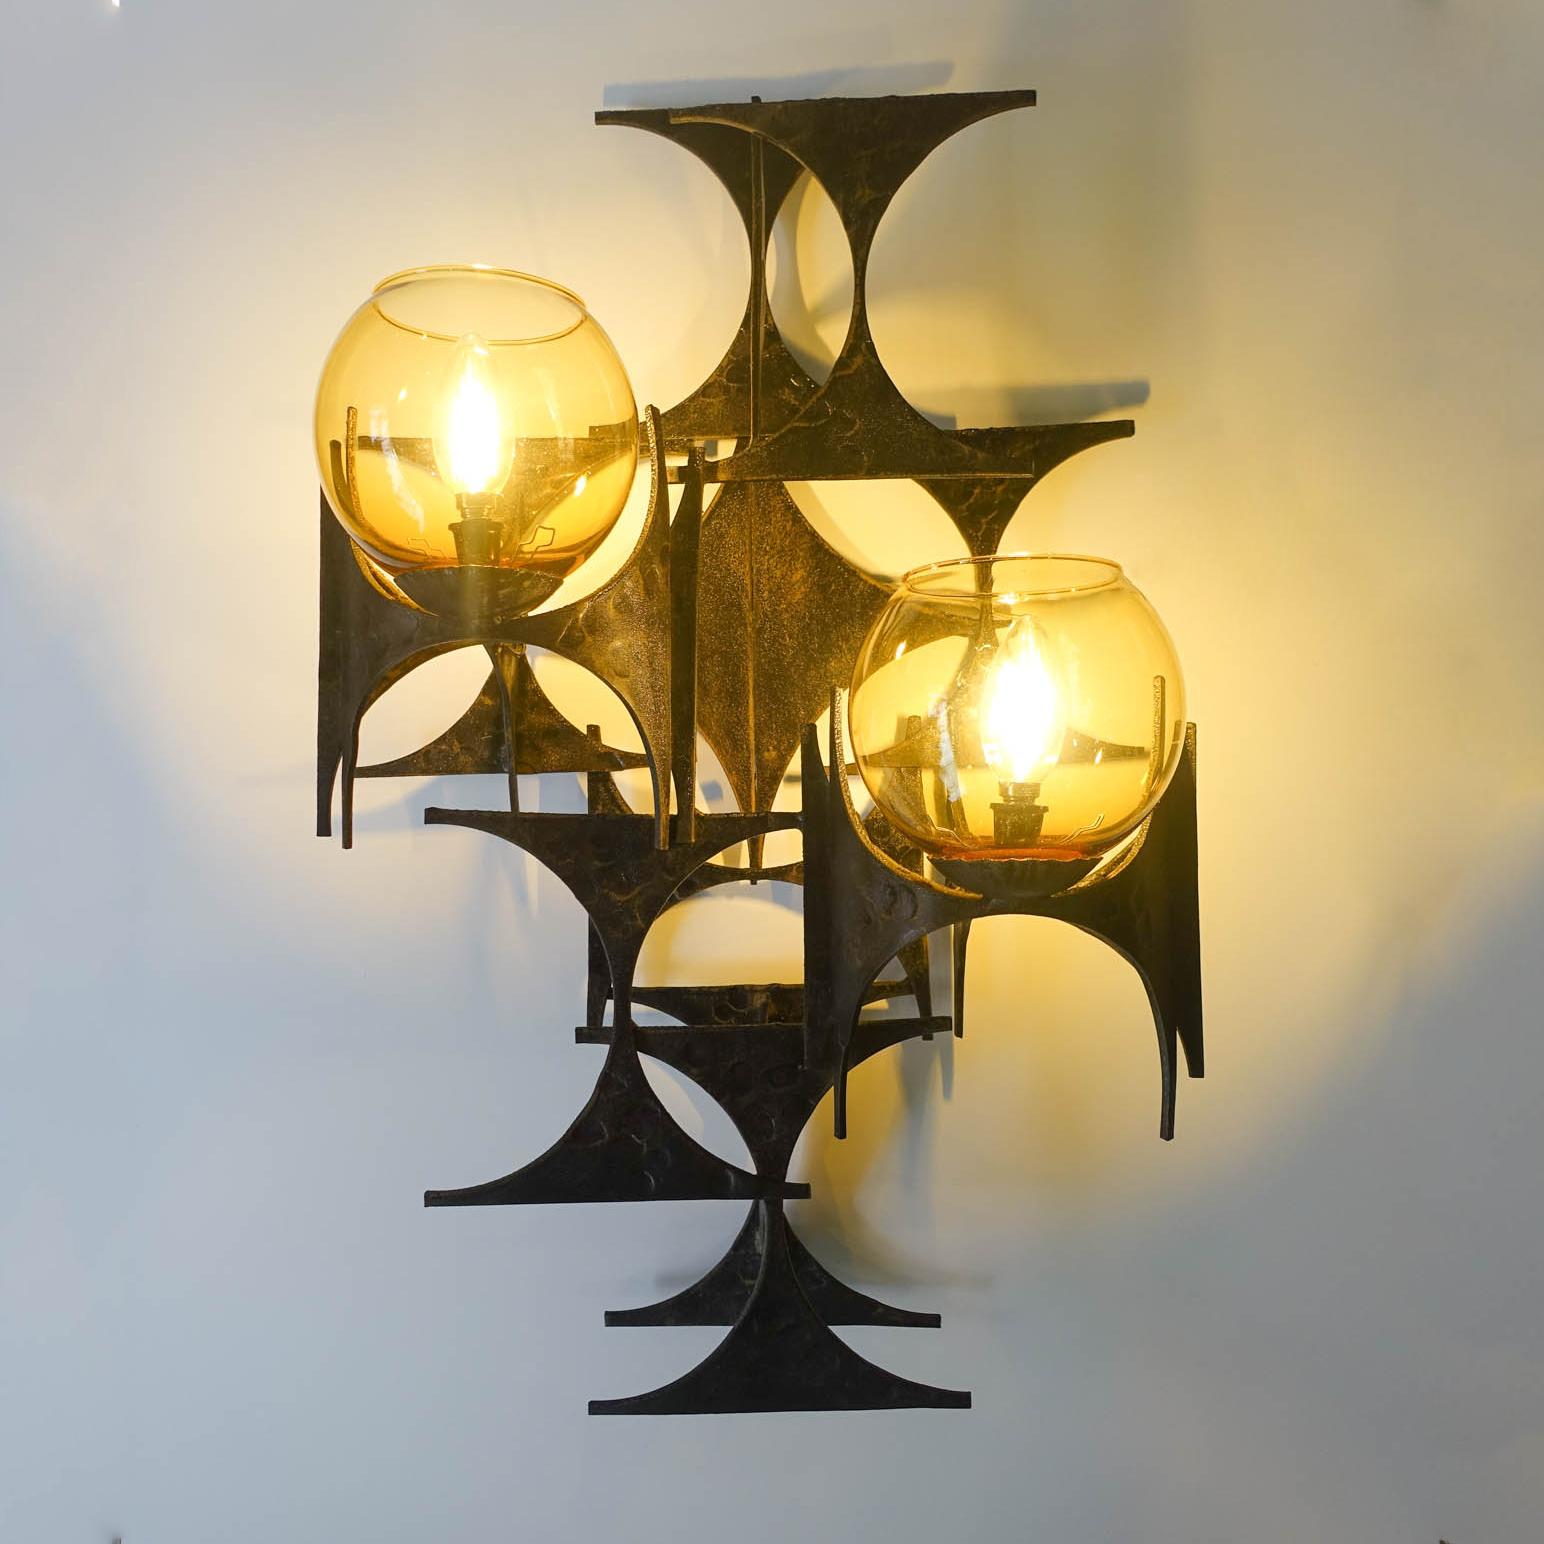 This brutalist sconce was designed and produced by Marc Weinstein, in USA, during the 1960's. This iron sconce is made of metal hourglass-shaped pieces that have been layered and soldered together with a brush copper and bronze patina, were two